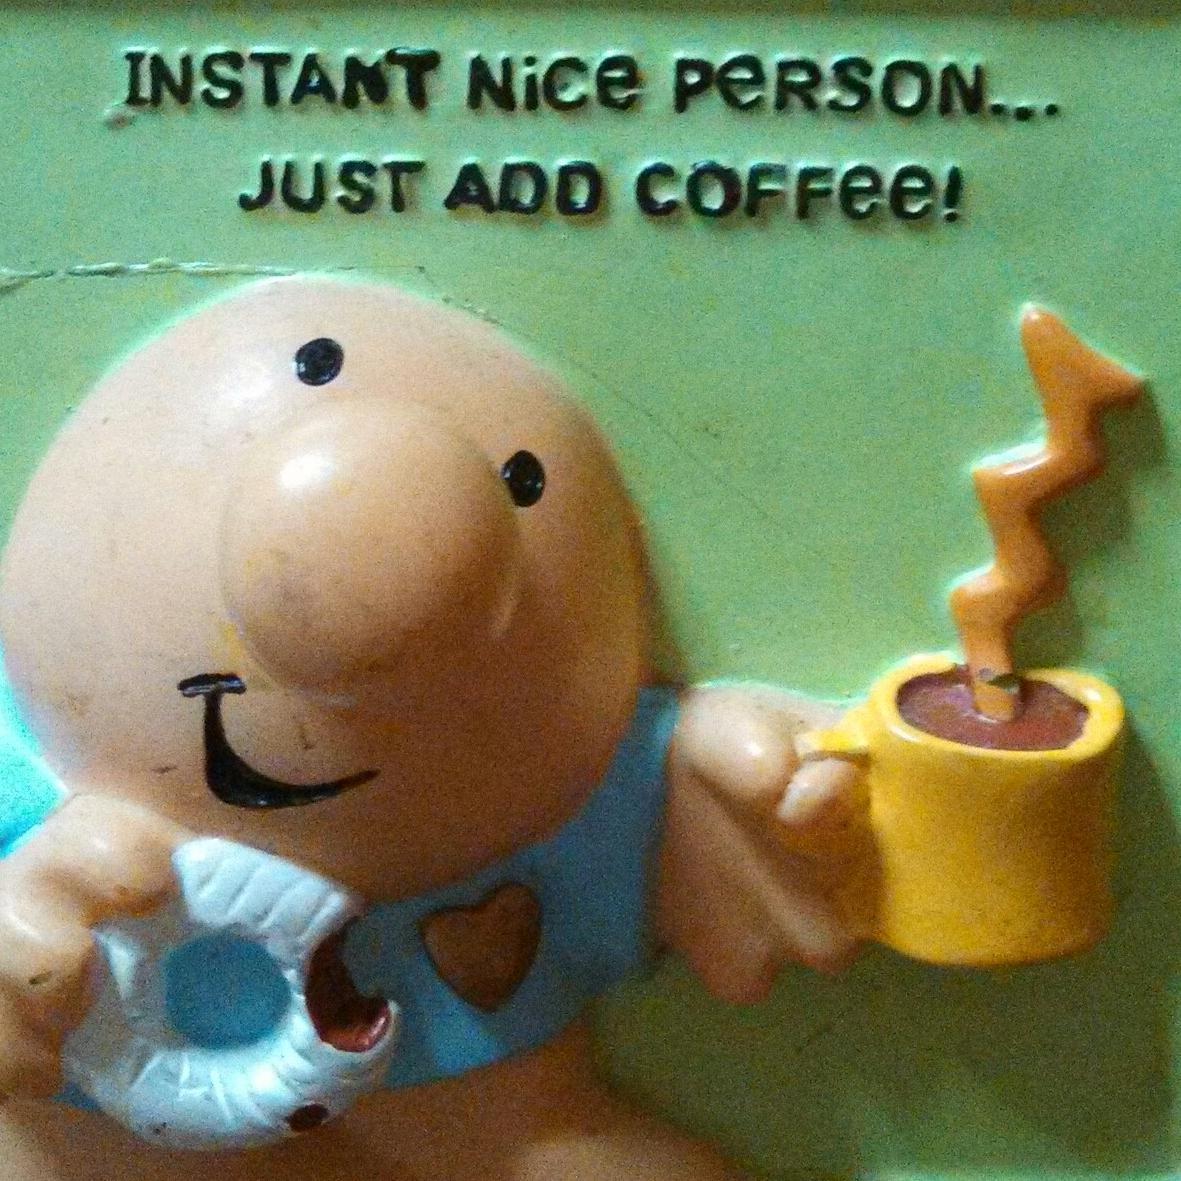 Instant nice person, just add coffee.